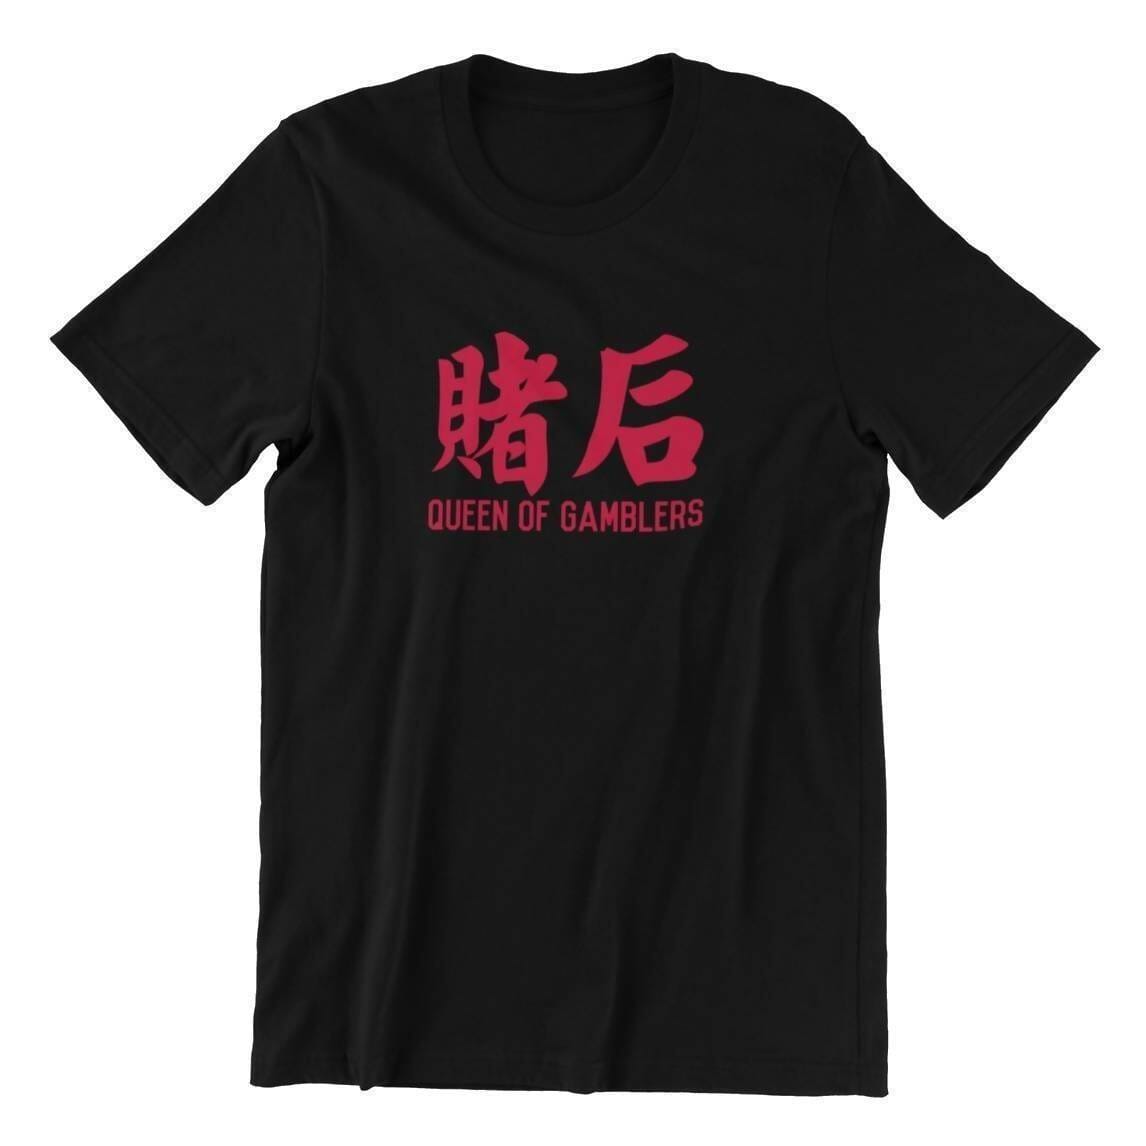 [Clearance Sales] Queen of Gamblers Crew Neck S-Sleeve T-shirt Local T-shirts Wet Tee Shirt 4XL Black 